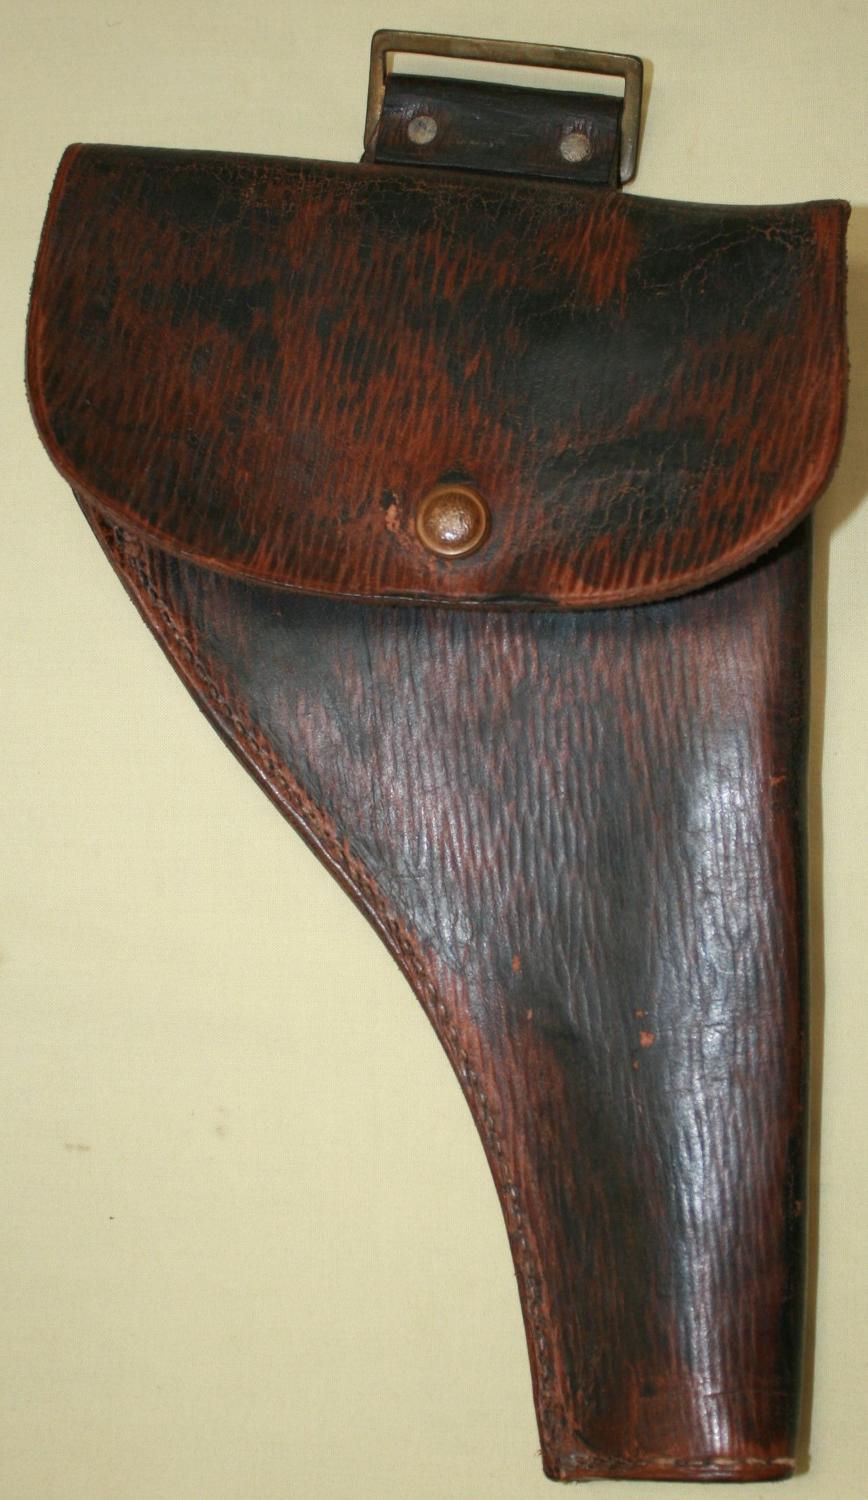 A 1939 DATED 39 PATTERN LEATHER EQUIPMENT HOLSTER